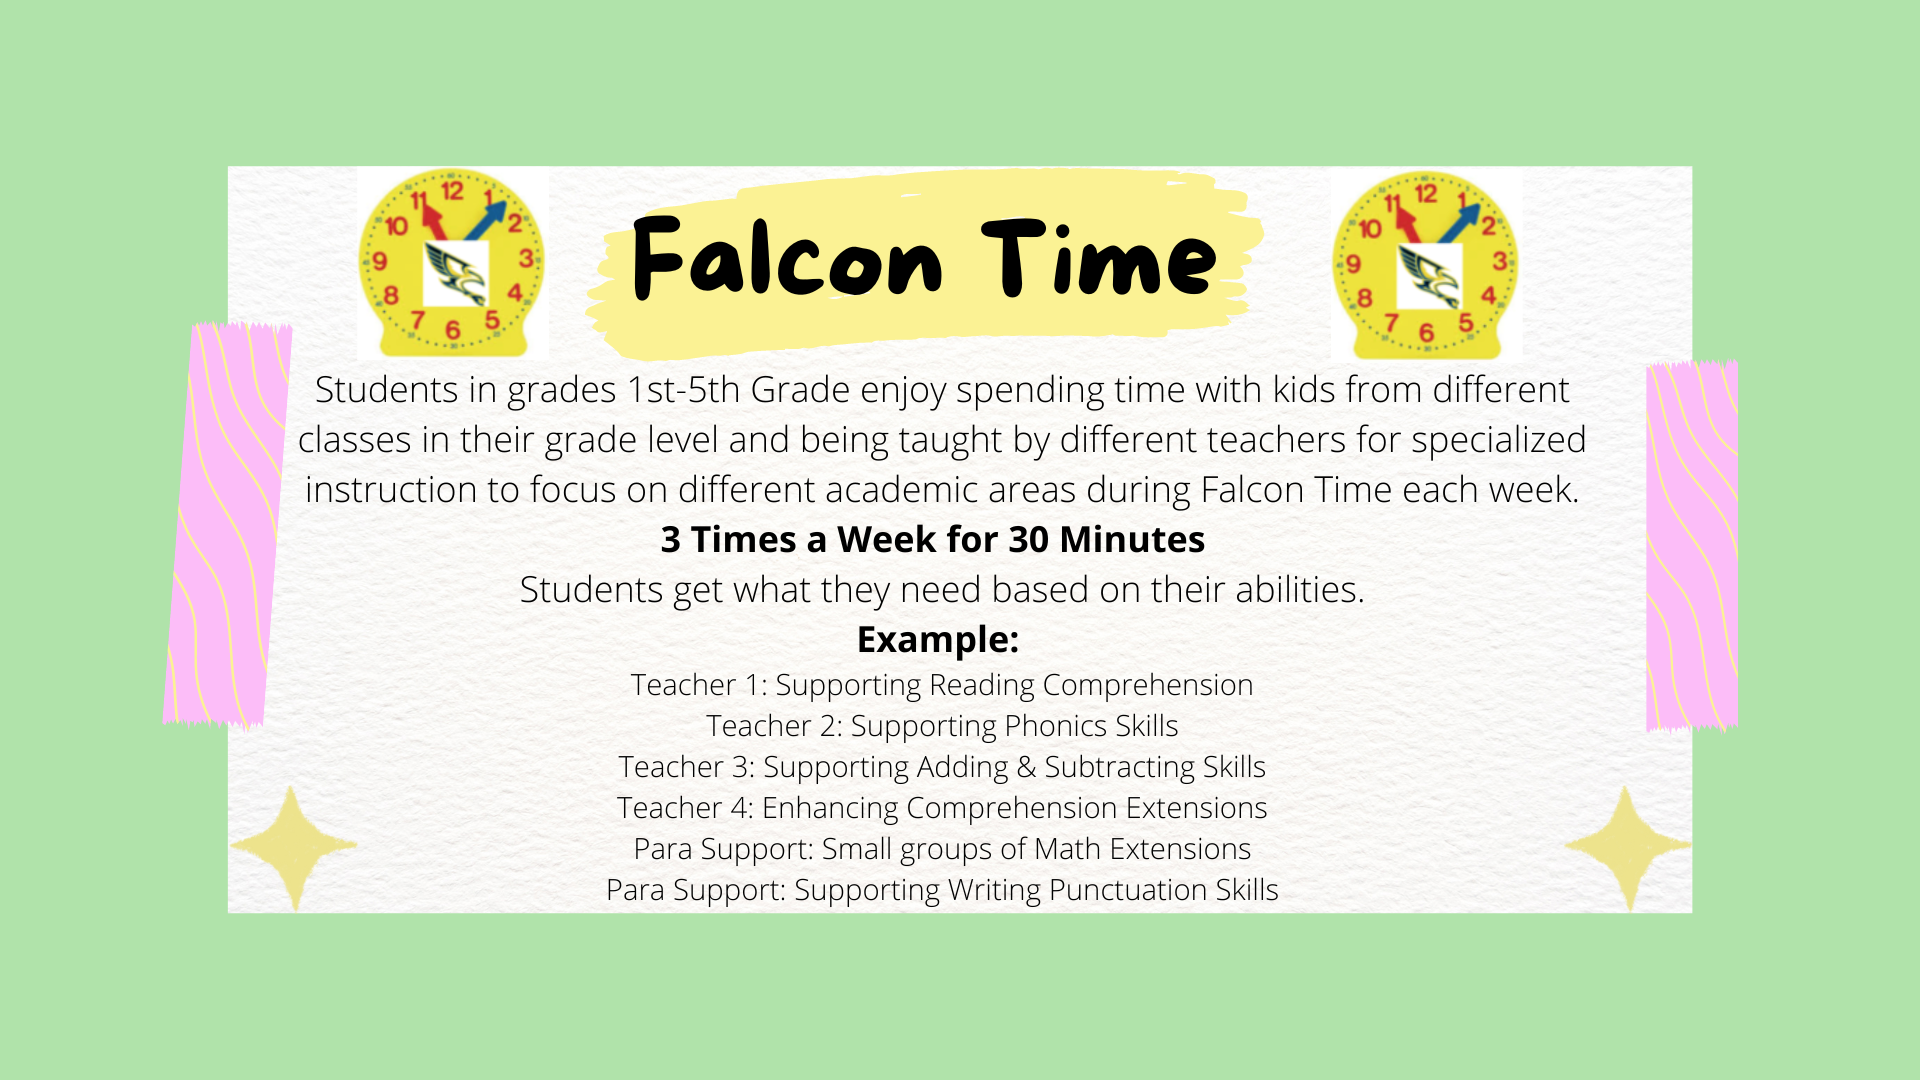 Falcon Time: Common Learning Time